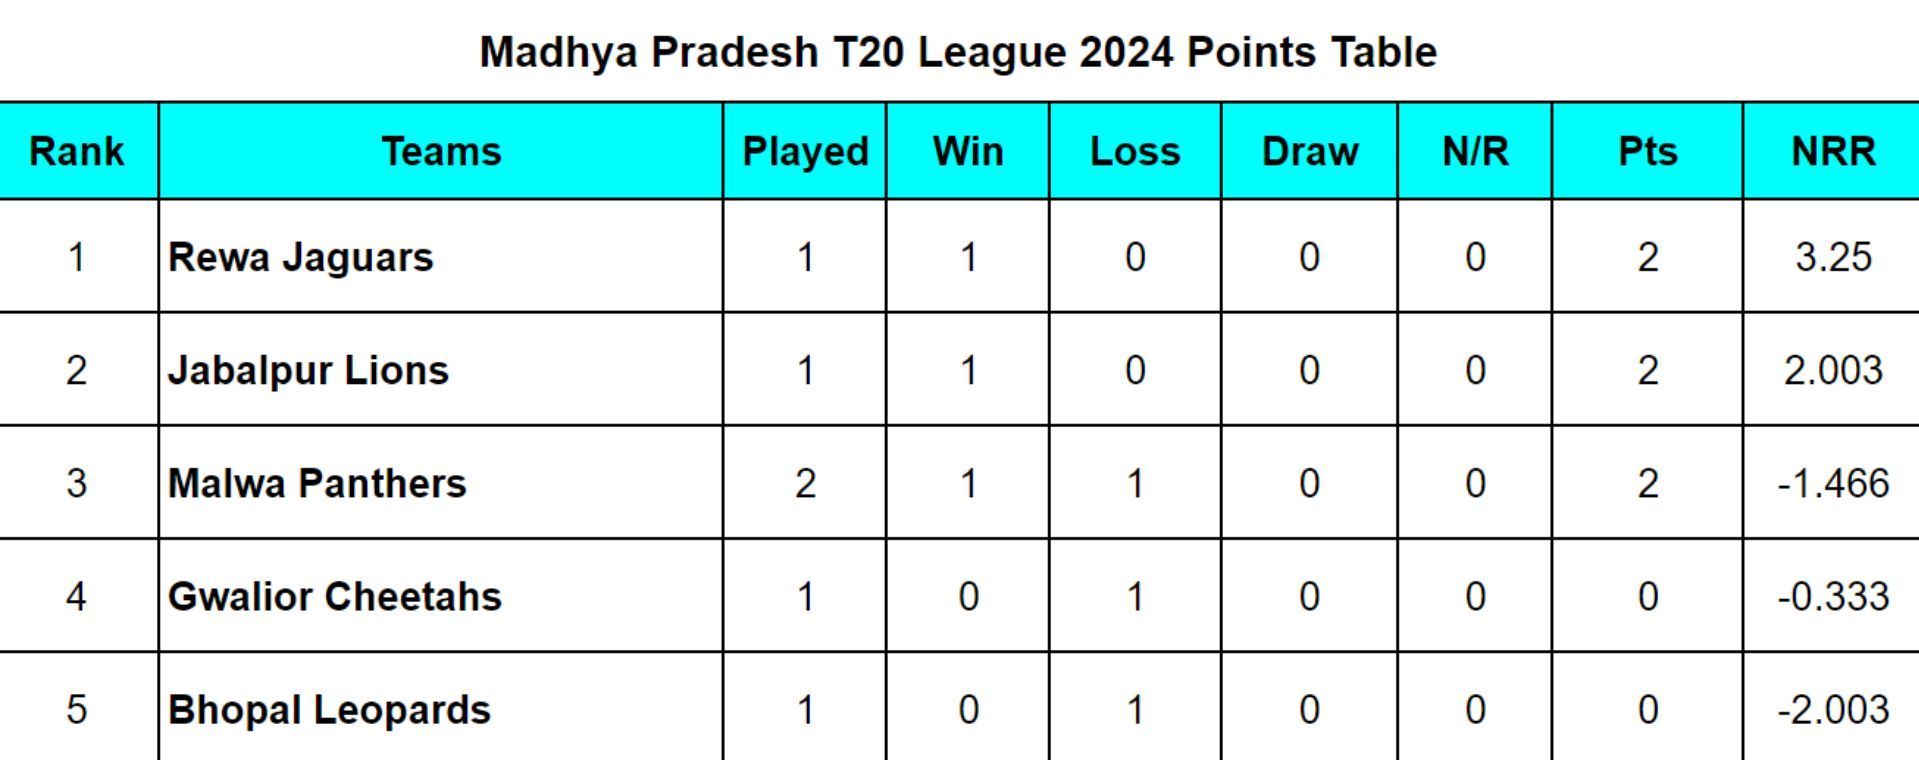 Madhya Pradesh T20 League 2024 Points Table Updated after Match 3